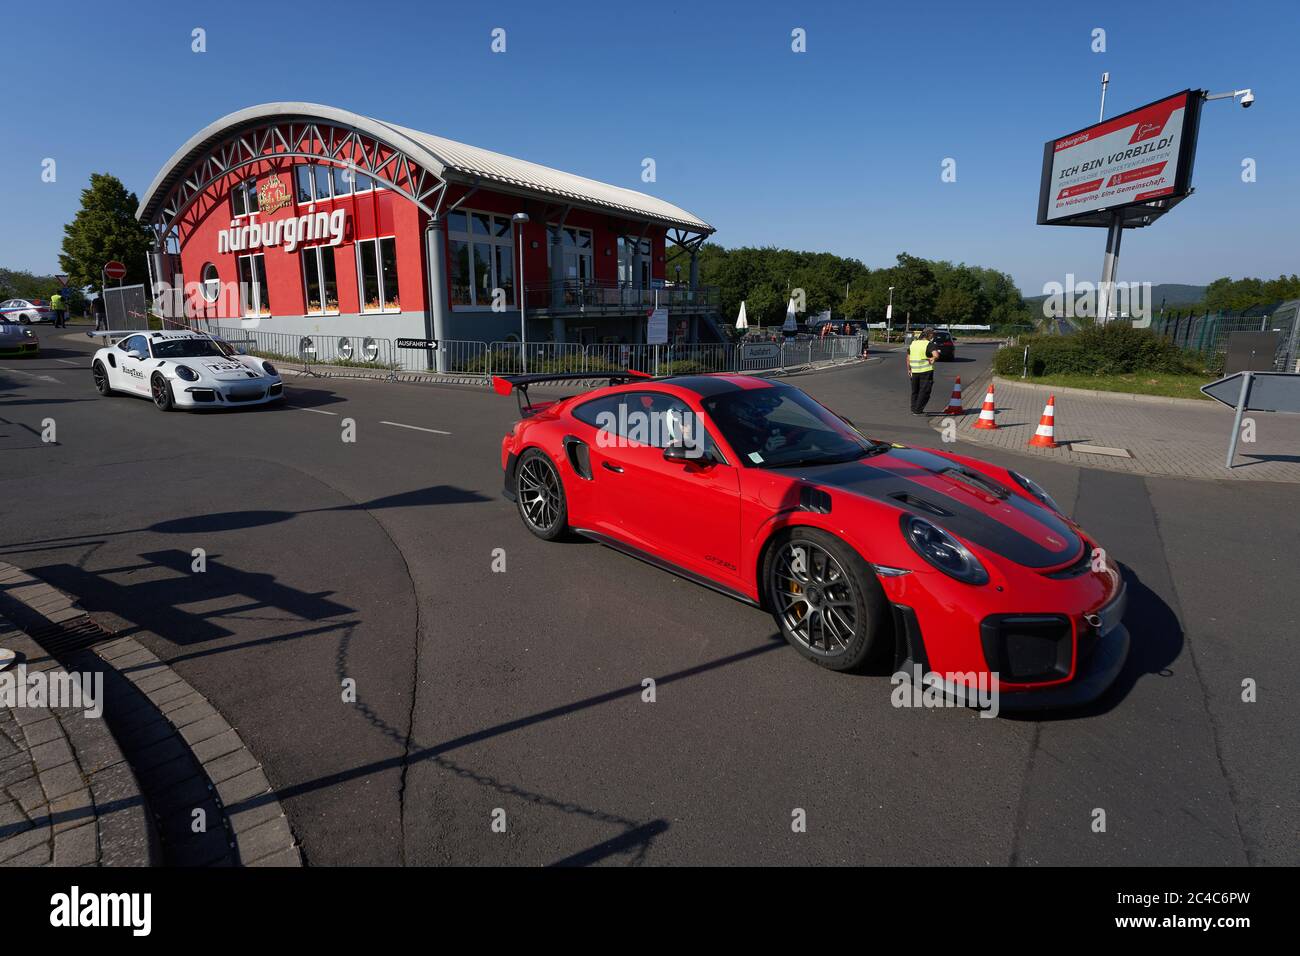 23 June 2020, Rhineland-Palatinate, Nürburg: Hobby racing drivers start off  on tourist trips on the legendary Nordschleife of the Nürburgring. During  the contactless tourist drives, hobby racing drivers can load a credit